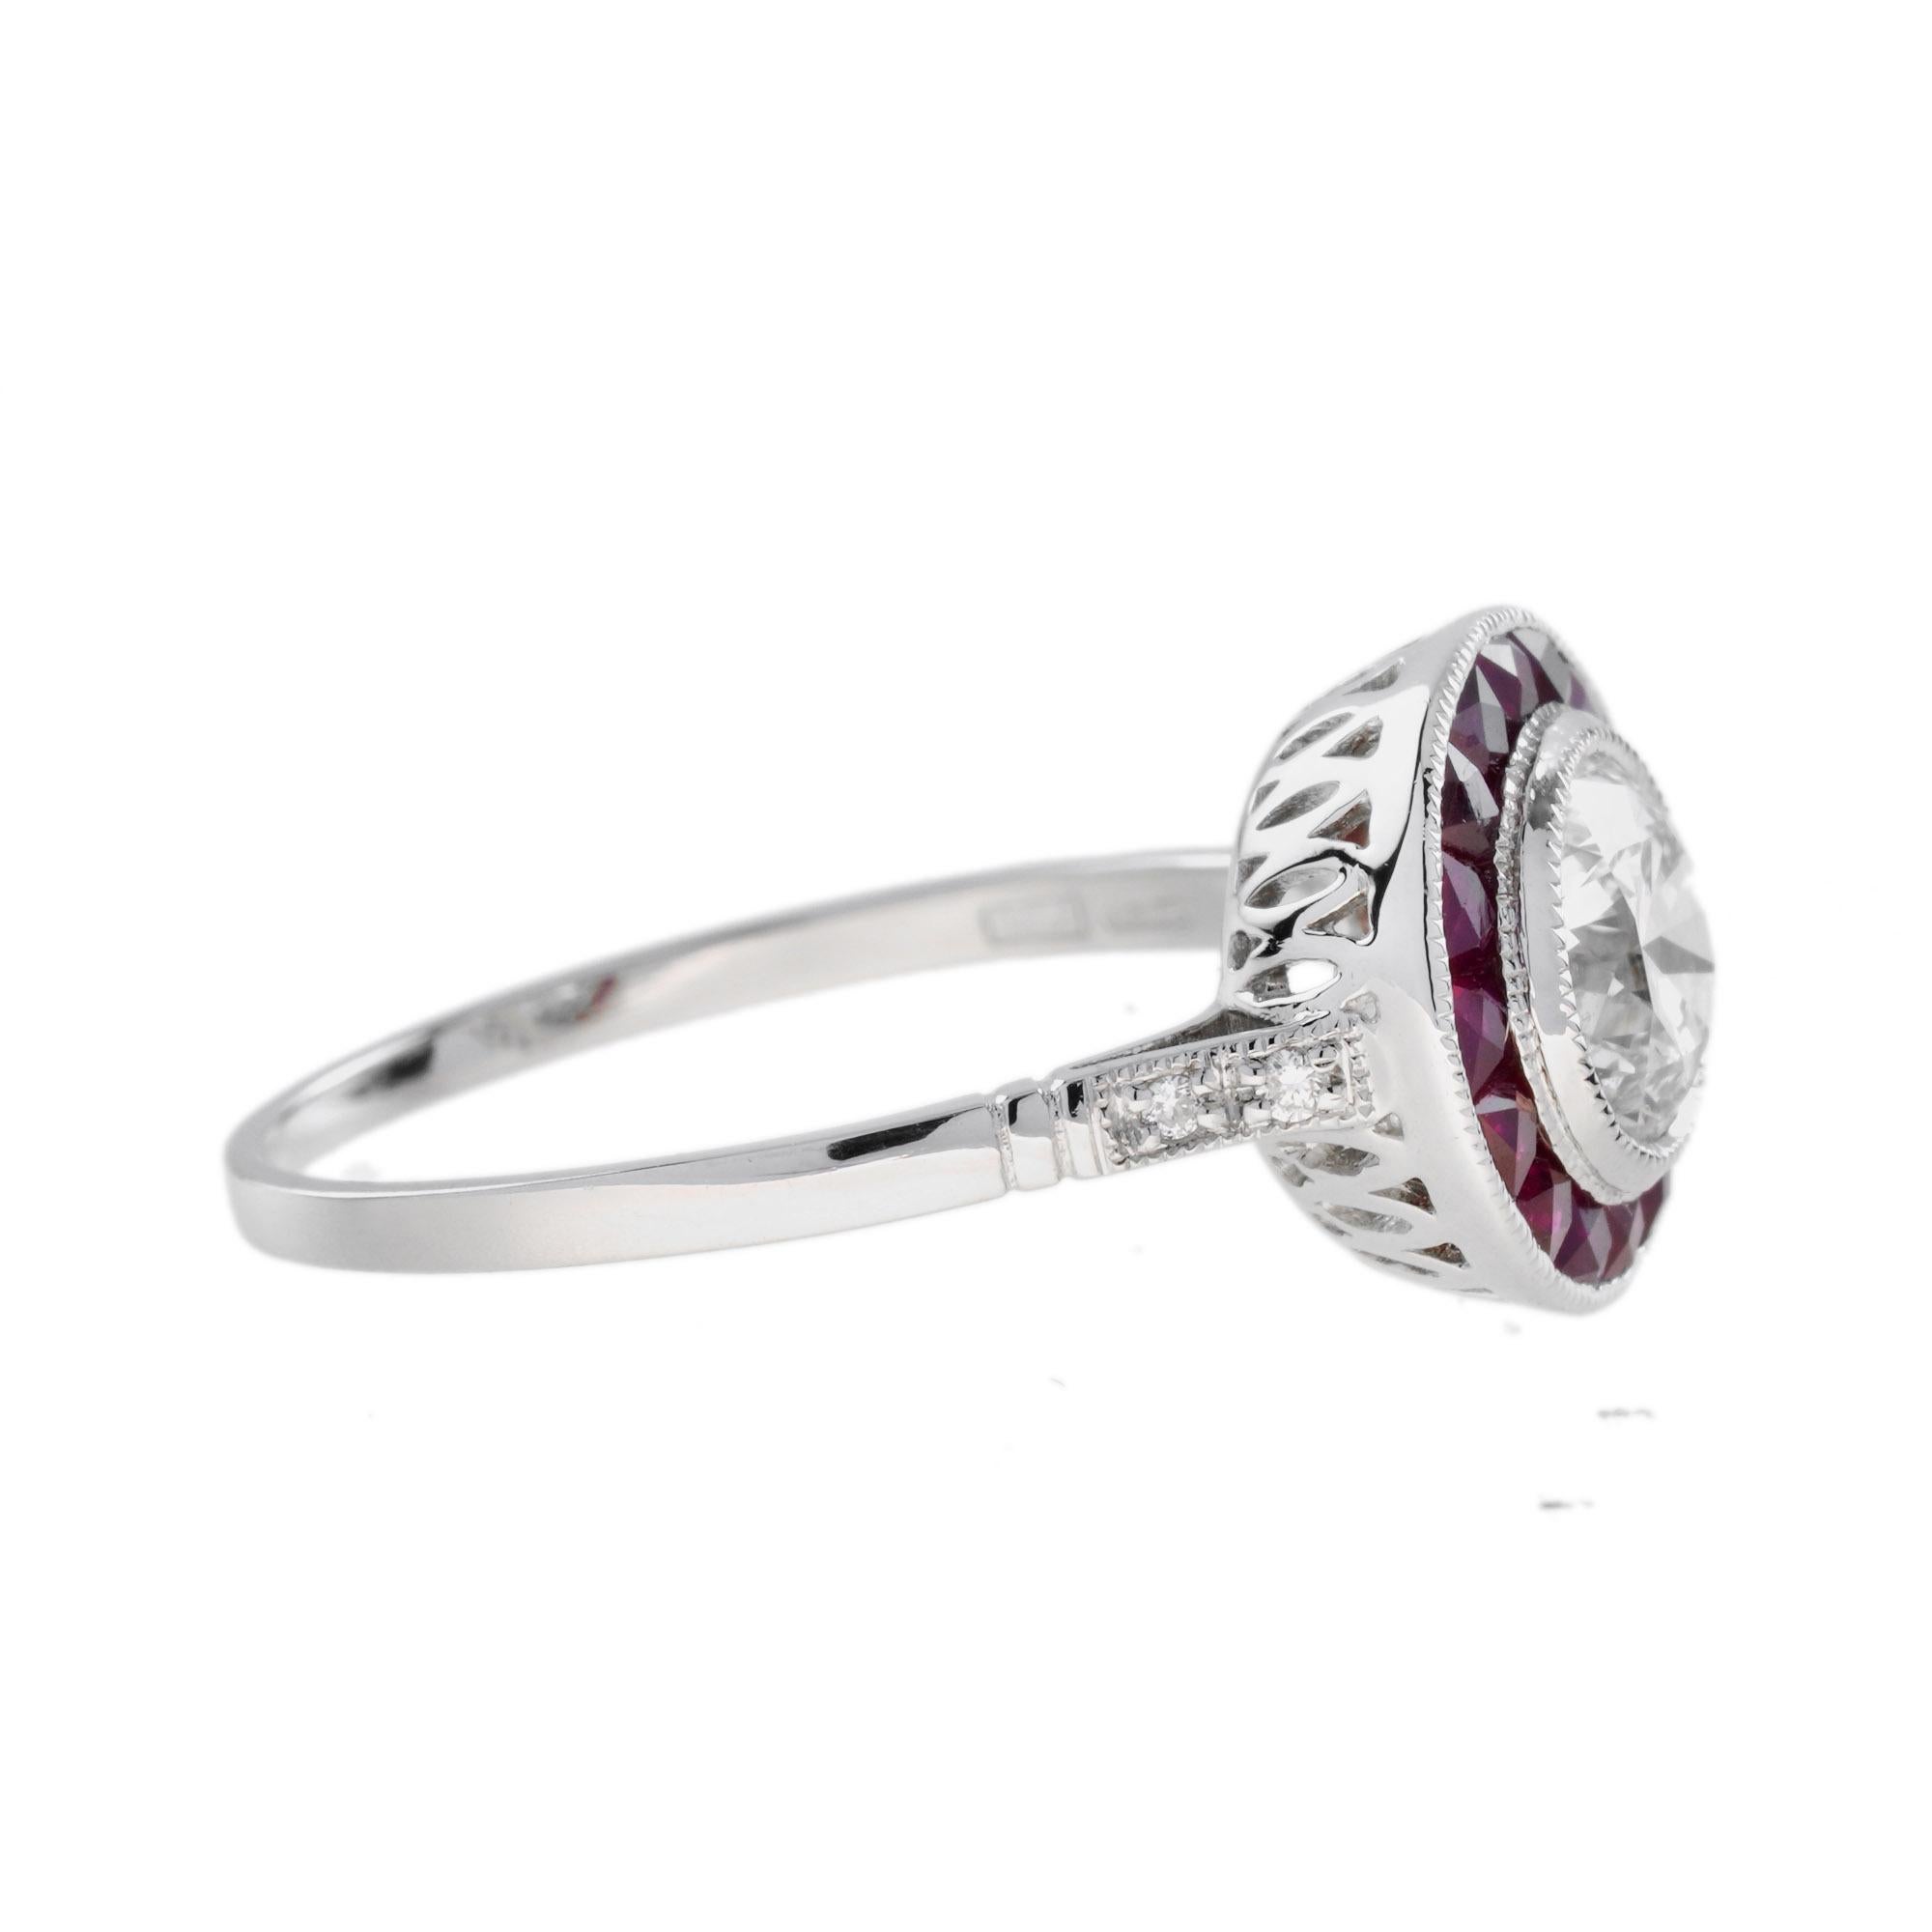 Certified 1 Ct. Diamond and Ruby Art Deco Style Target Ring in Platinum 950 For Sale 1